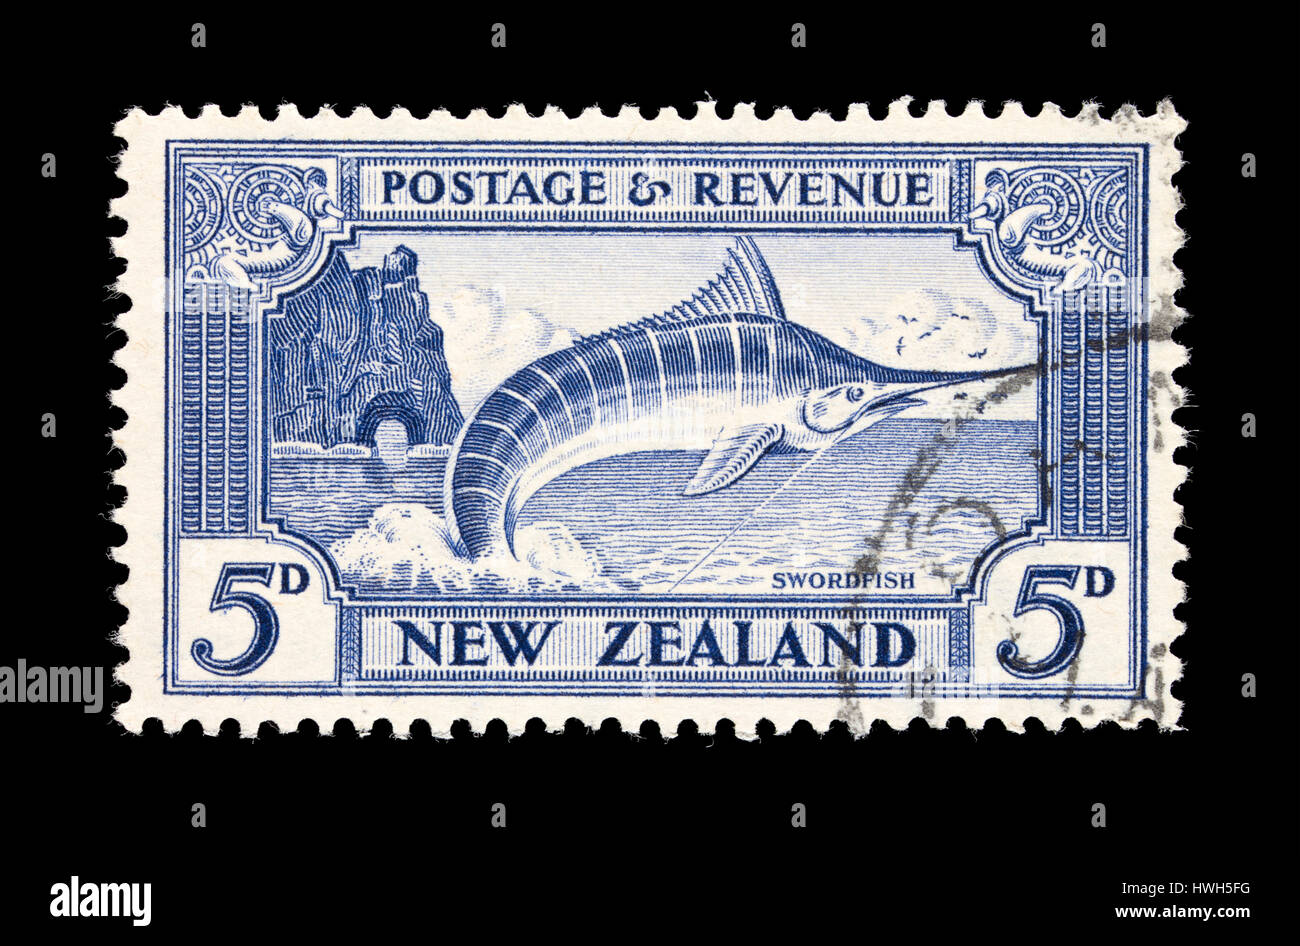 Postage stamp from New Zealand depicting a swordfish jumping after being caught by a sport fisherman. Stock Photo